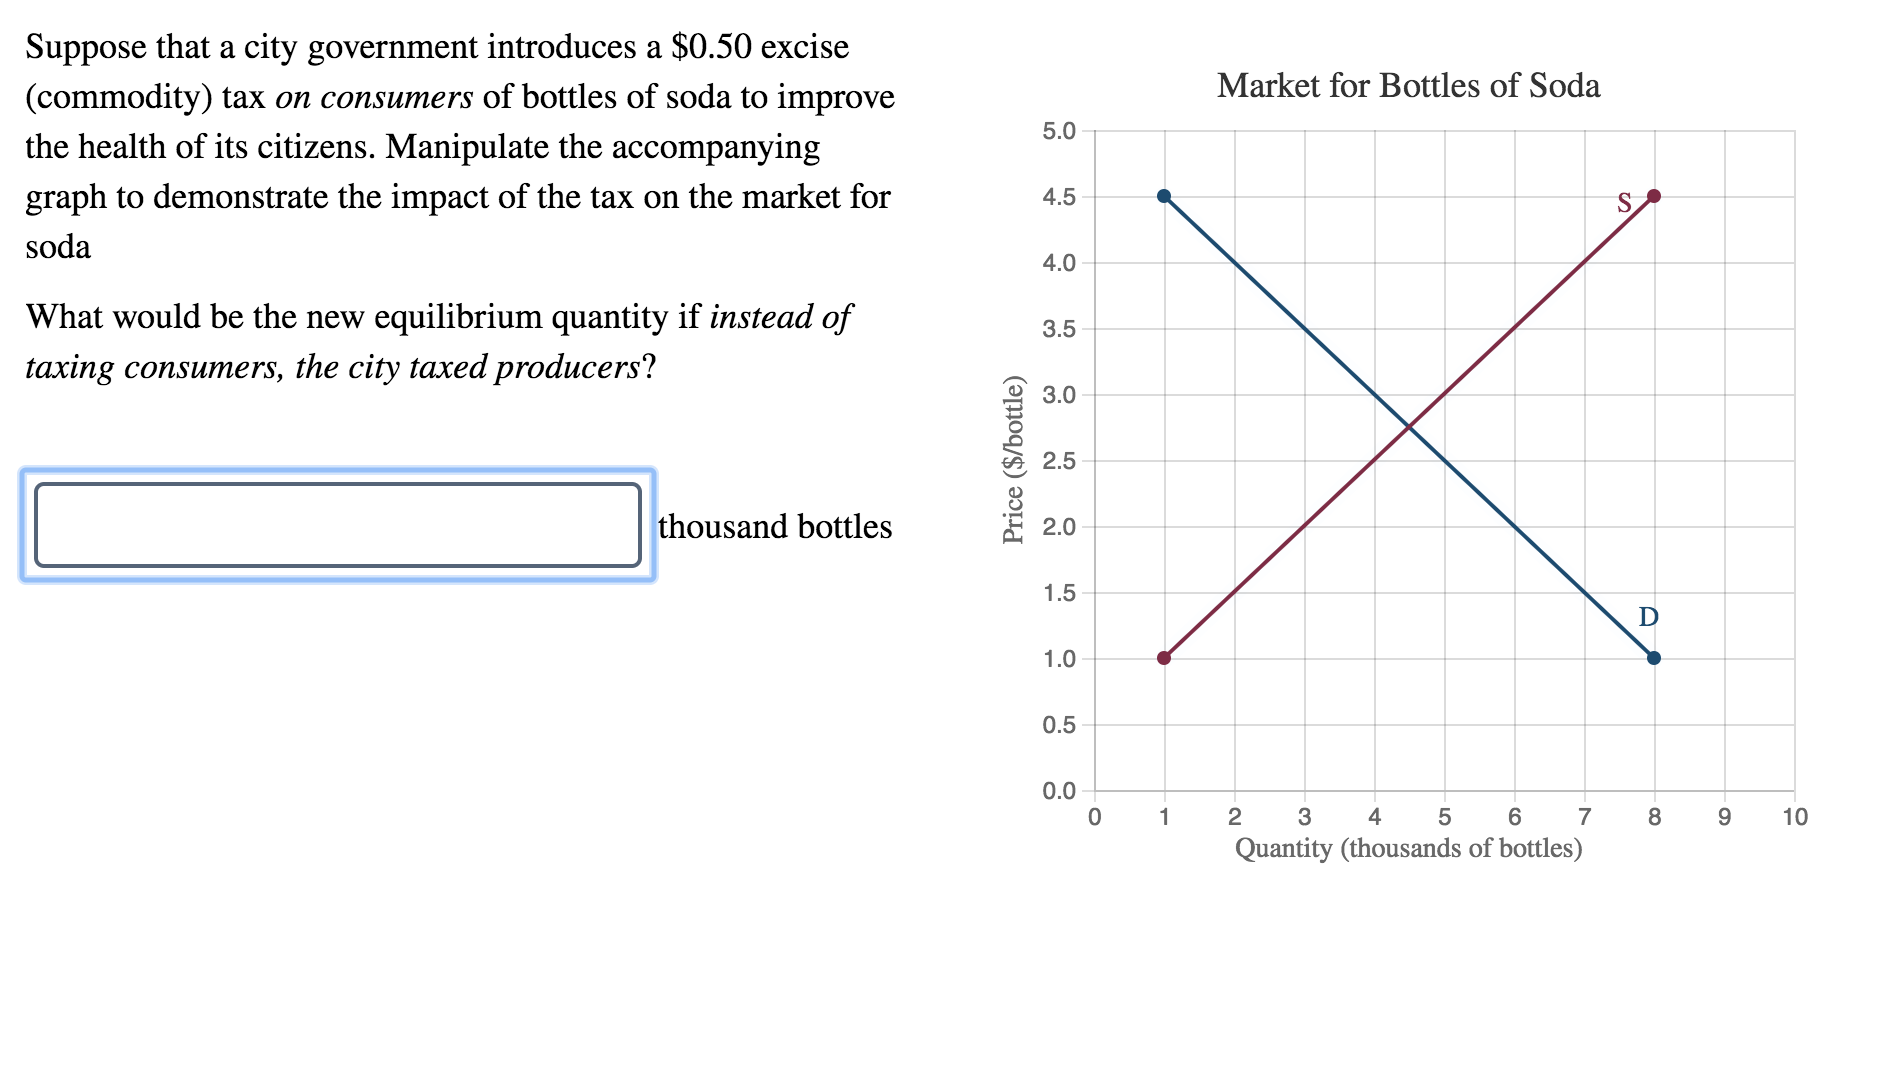 Suppose that a city government introduces a $0.50 excise
(commodity) tax on consumers of bottles of soda to improve
the health of its citizens. Manipulate the accompanying
graph to demonstrate the impact of the tax on the market for
soda
Market for Bottles of Soda
5.0
4.5
4.0
What would be the new equilibrium quantity if instead of
taxing consumers, the city taxed producers?
3.5
3.0
2.5
thousand bottle:s
2.0
0.5
0.0
0
2 34
Quantity (thousands of bottles)
5
8 9 10
